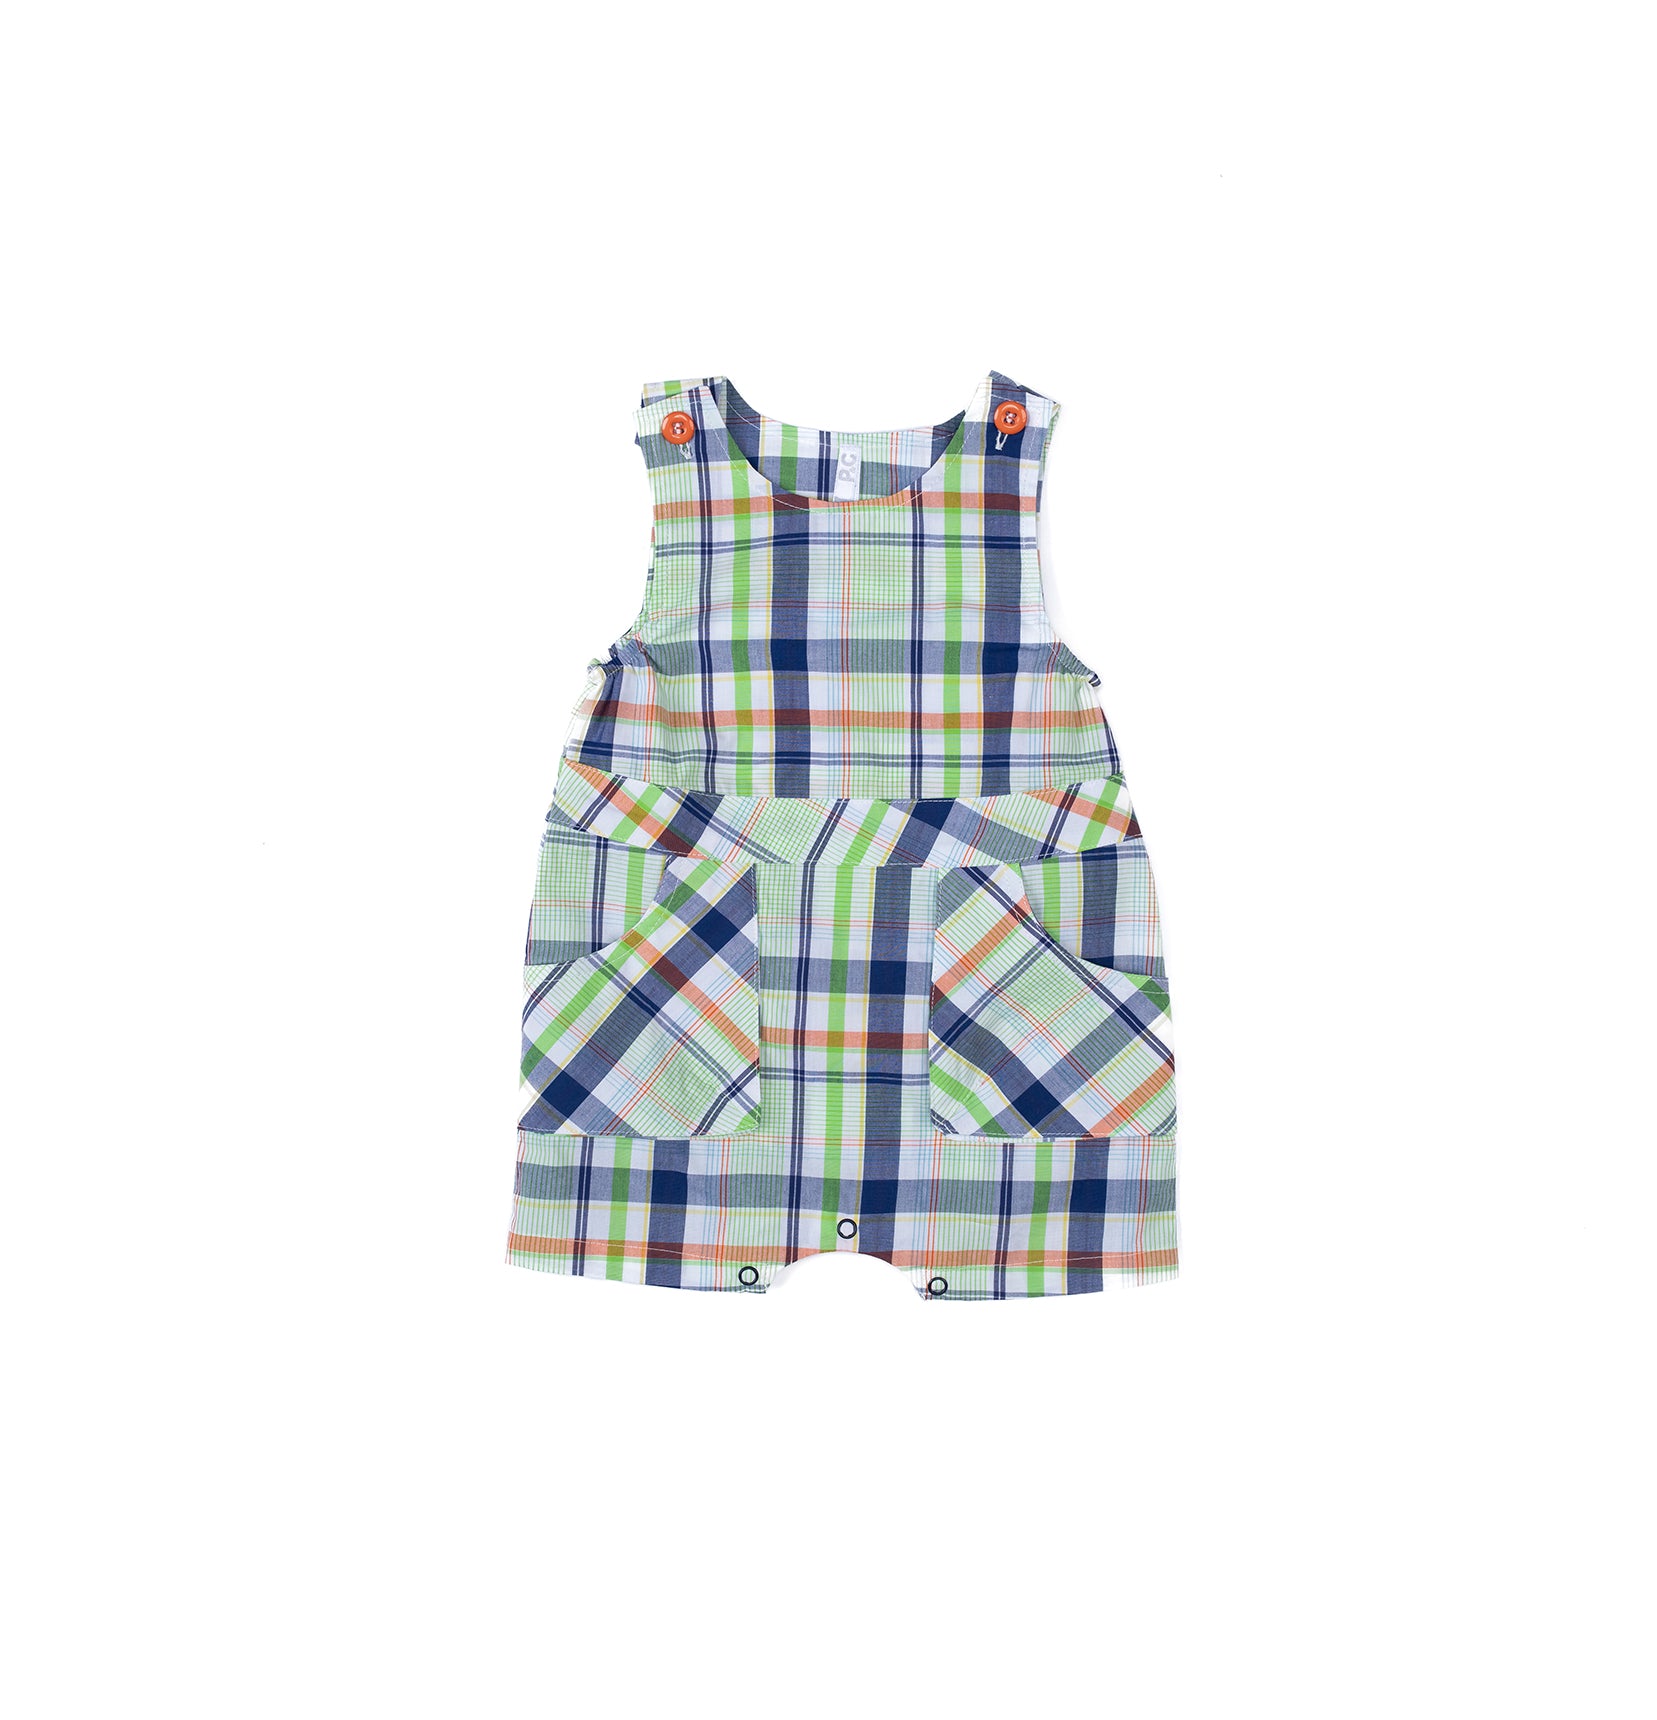 Colored cool sleeveless Babyboy romper by Pompelo